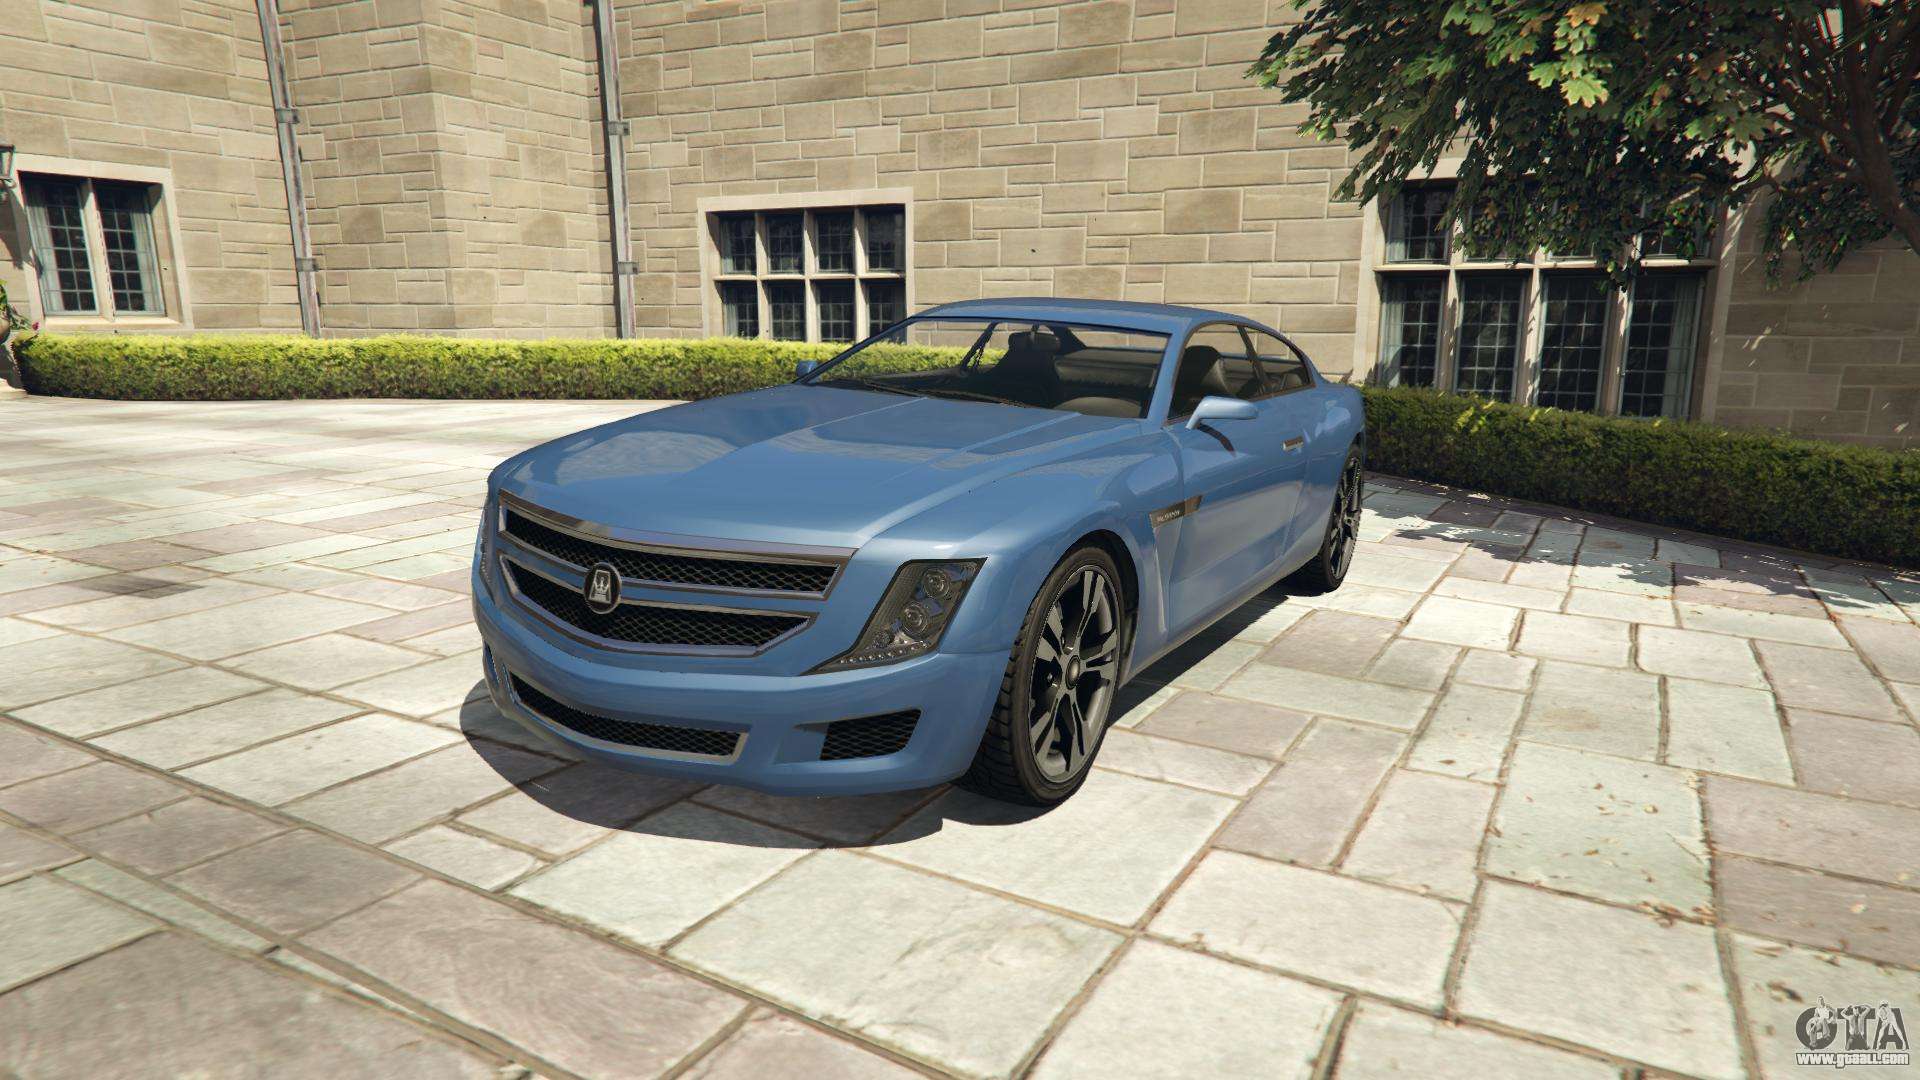 Albany Alpha GTA 5 - front view